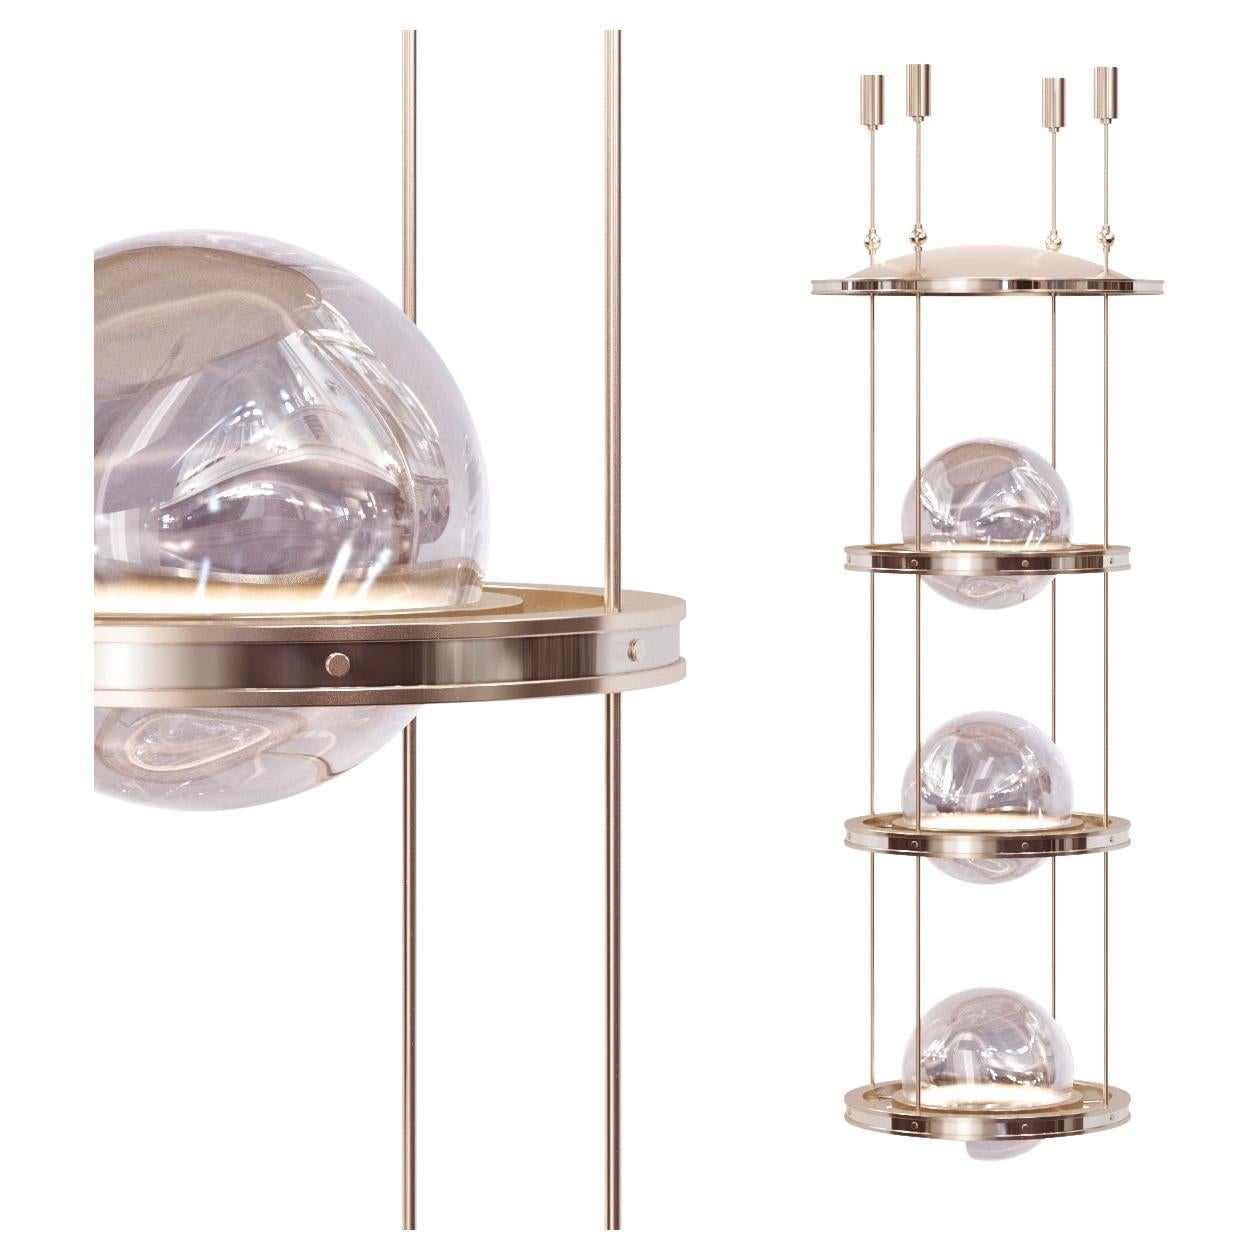 Meissa III Grand Polished Brass Chandelier with Art-Deco Vibes for High-Ceiling For Sale